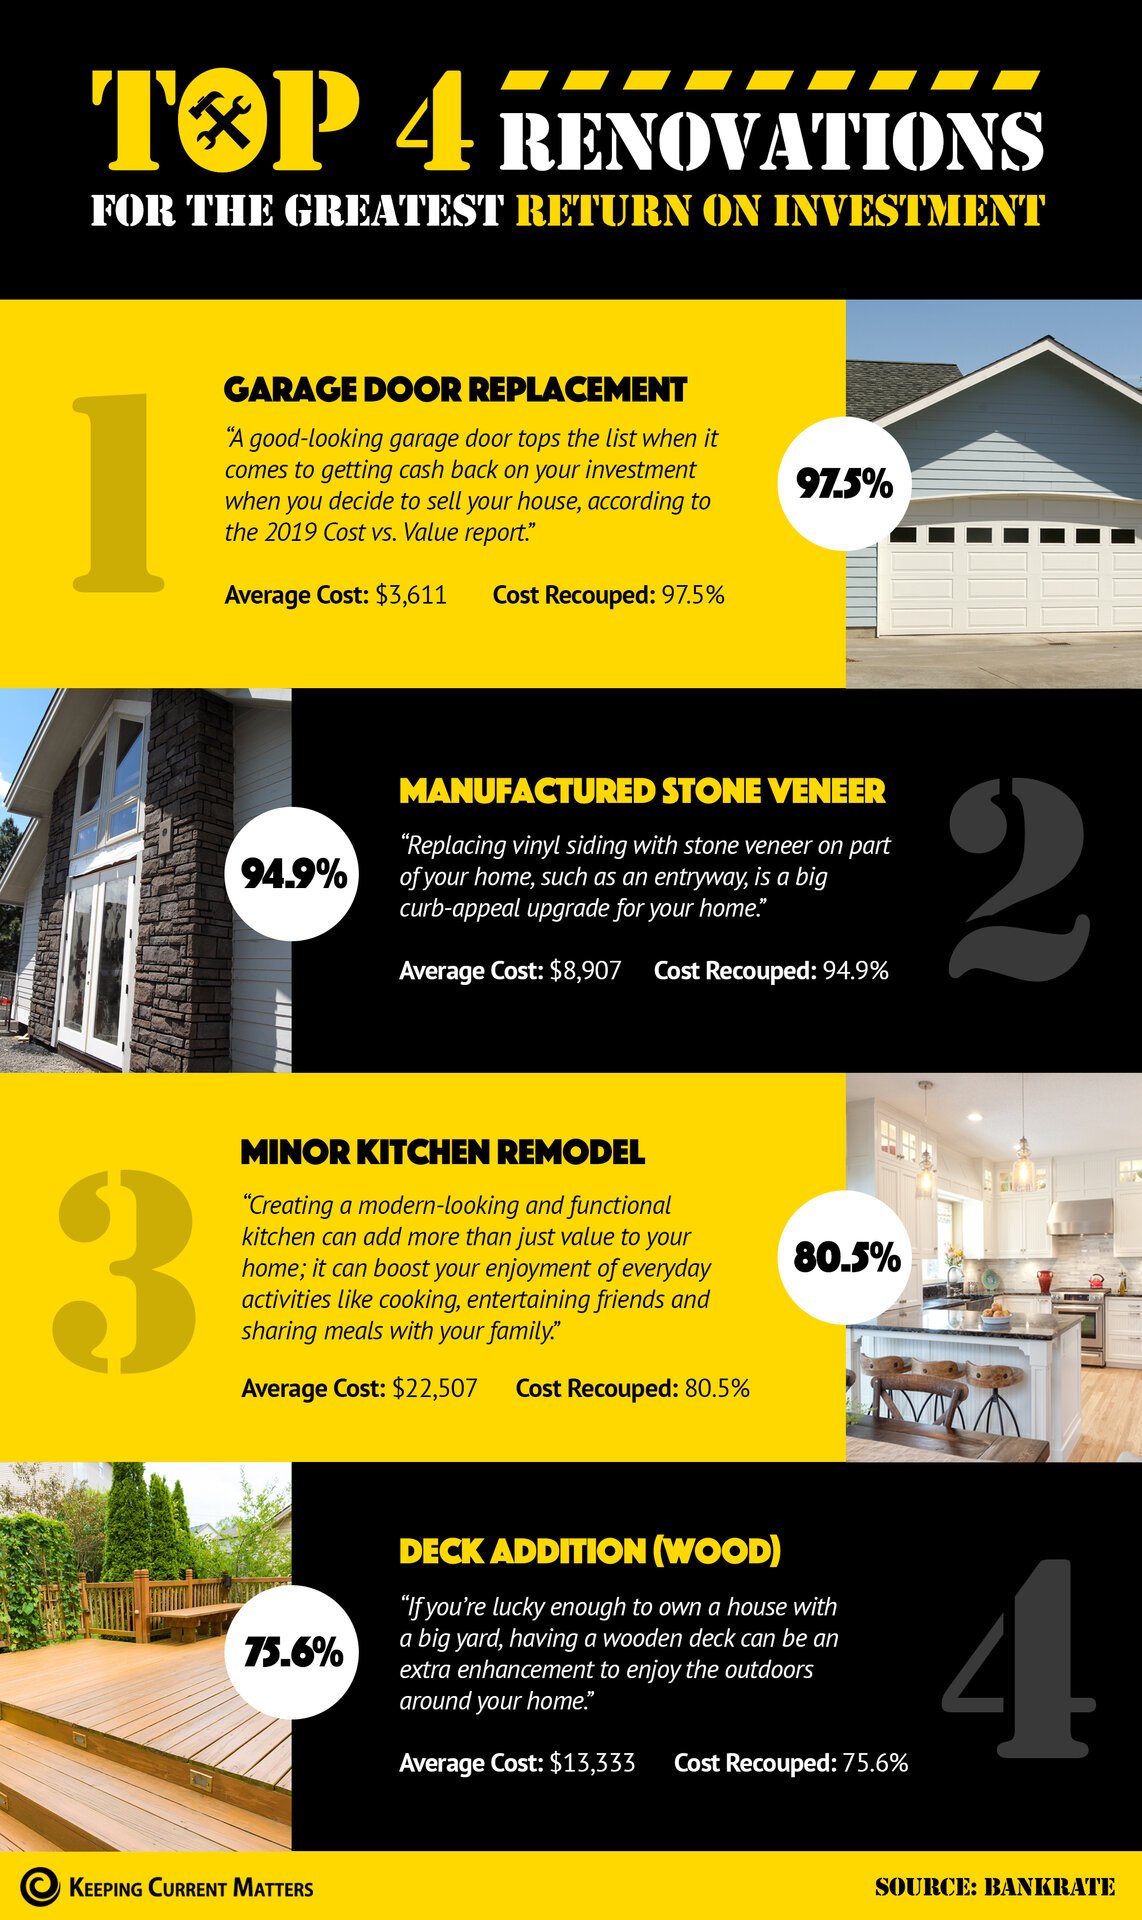 Top 4 Renovations for the Greatest Return on Investment! [INFOGRAPHIC] | Keeping Current Matters